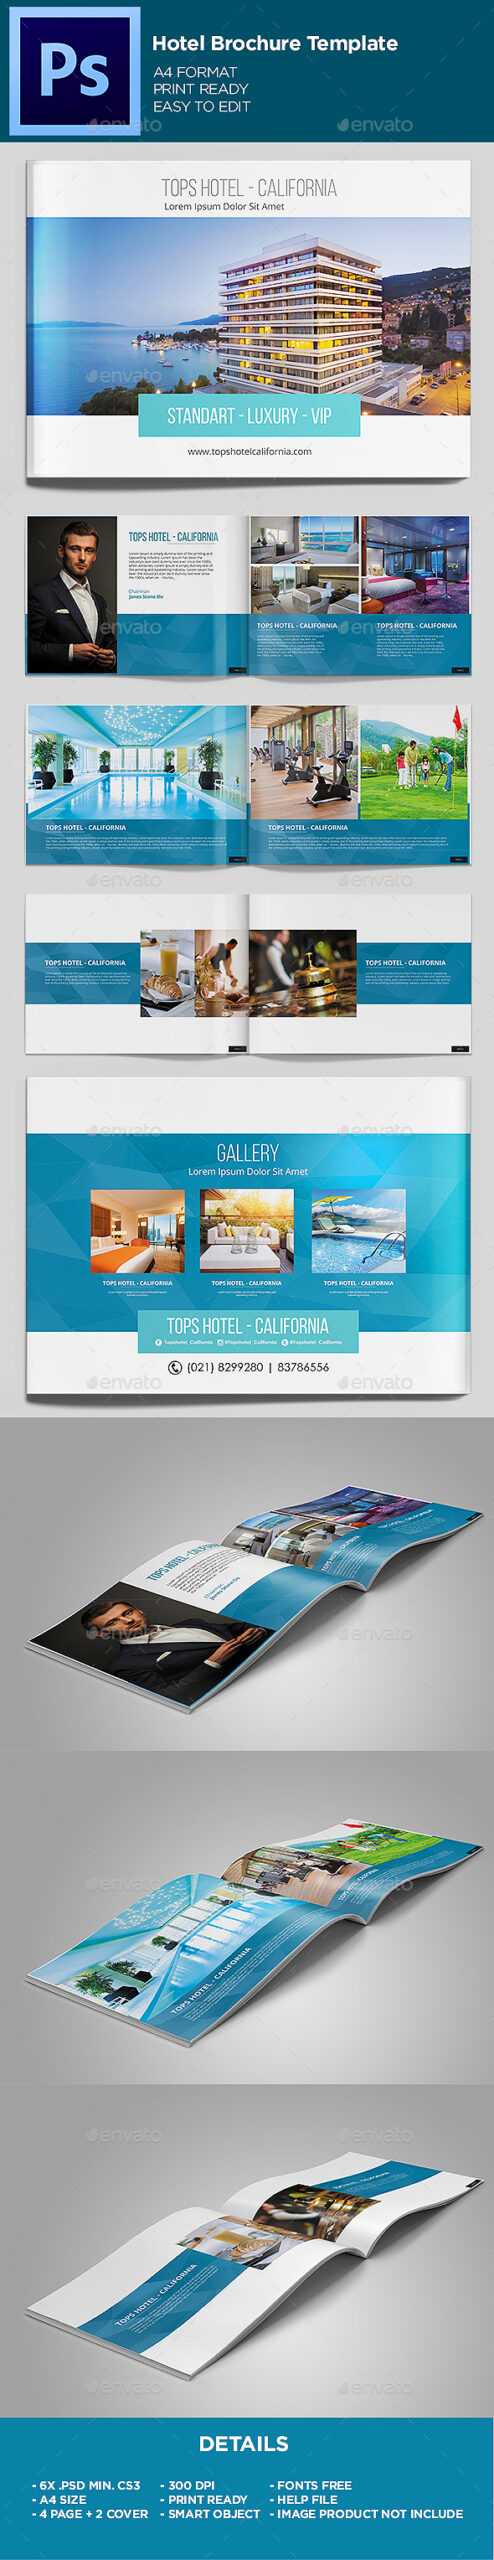 Hotel Brochure Graphics, Designs & Templates From Graphicriver Inside Hotel Brochure Design Templates